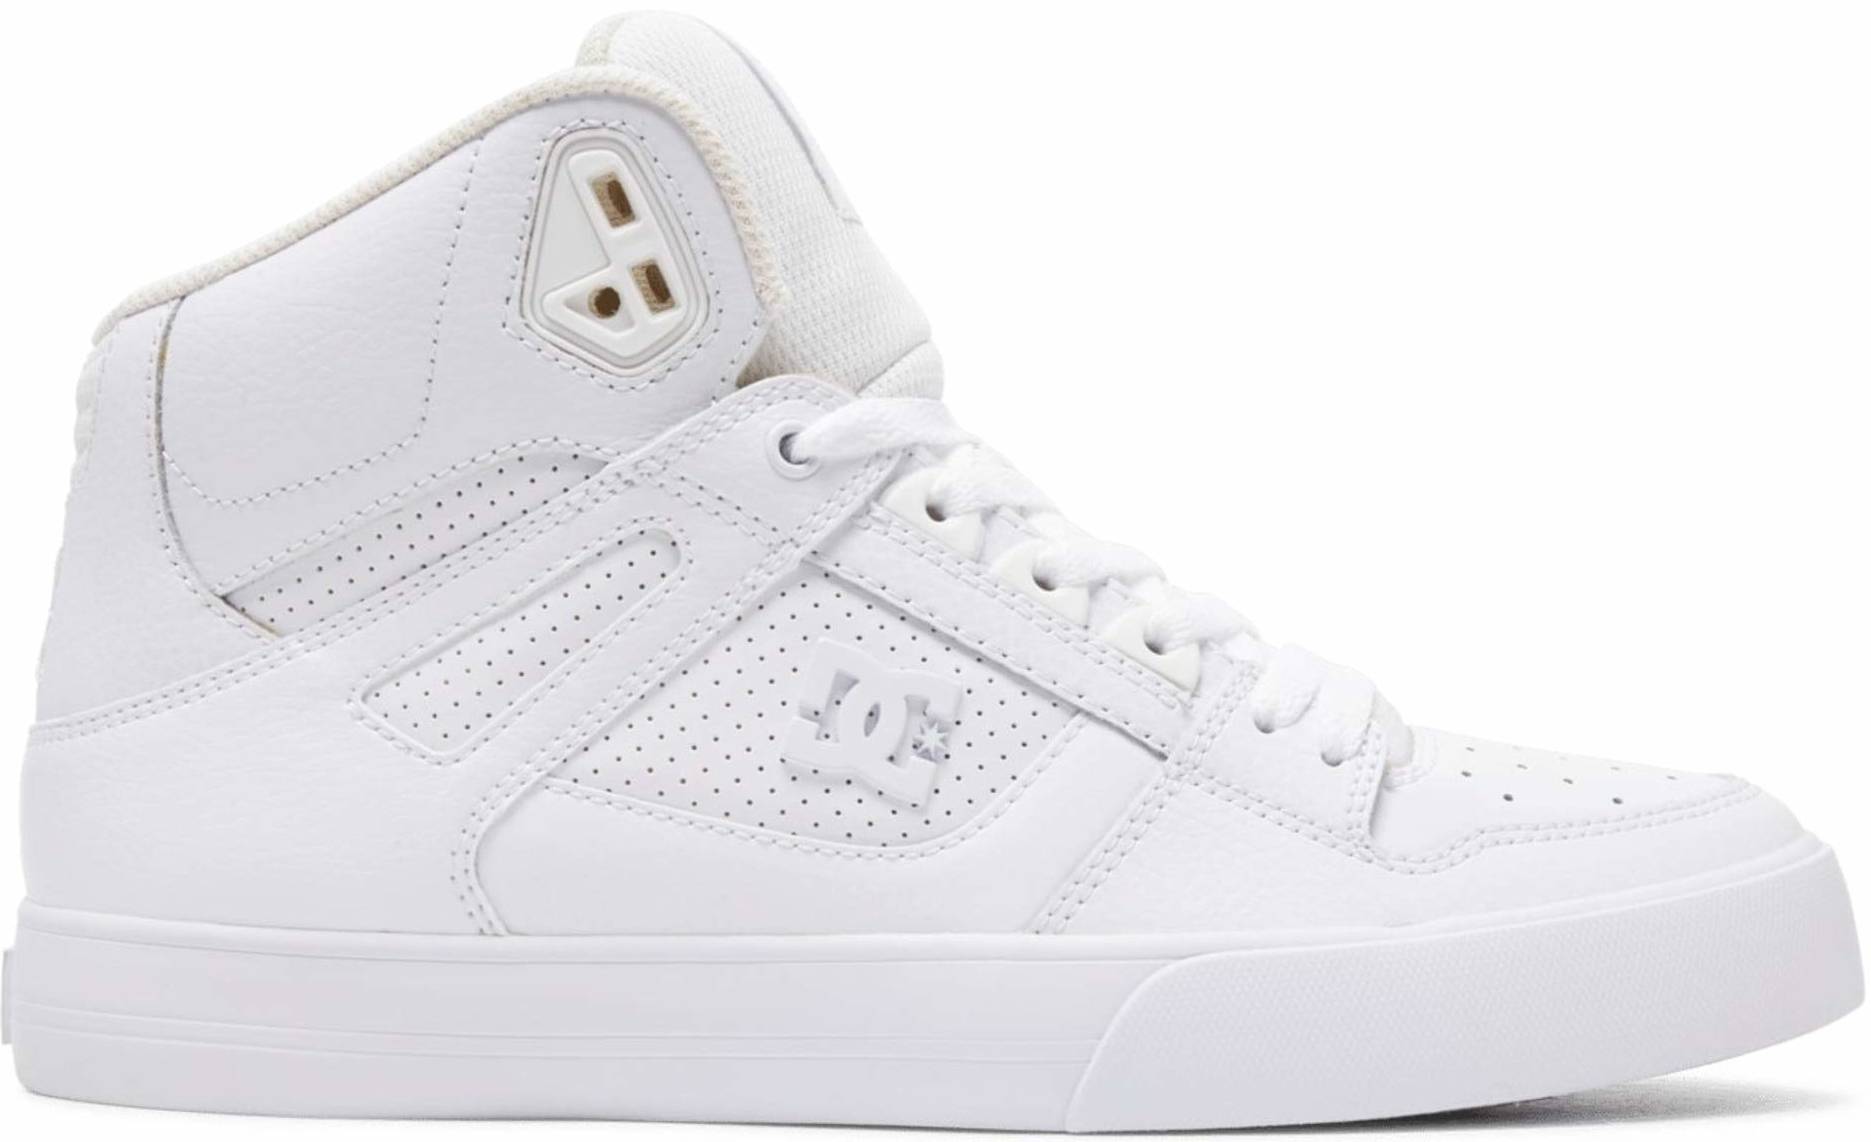 white high top shoes for men